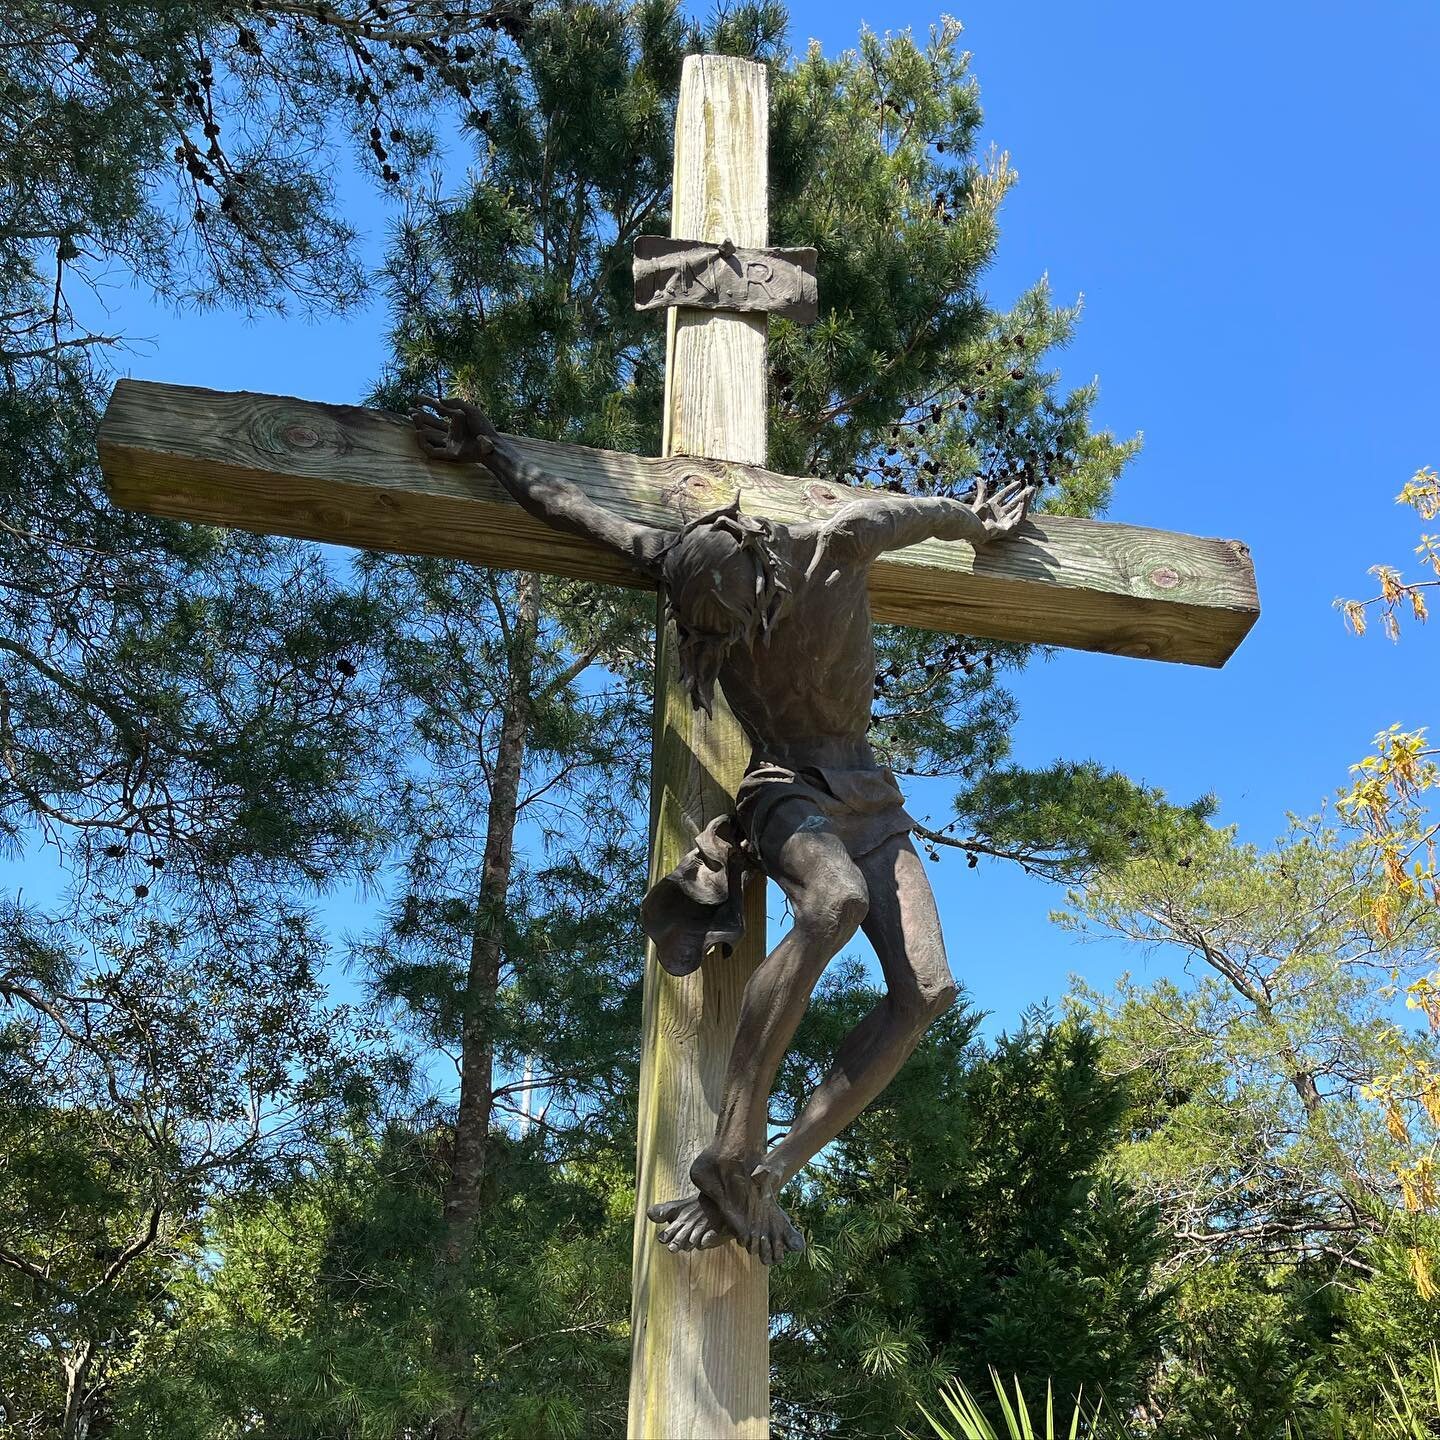 This is PERFECT LOVE.
I feel that this depiction of Christ hanging from the cross in a wrangled twisted form is a good representation of the ultimate sacrifice made for us.  Came across this at the Resurrection Catholic Church in Florida while on vac